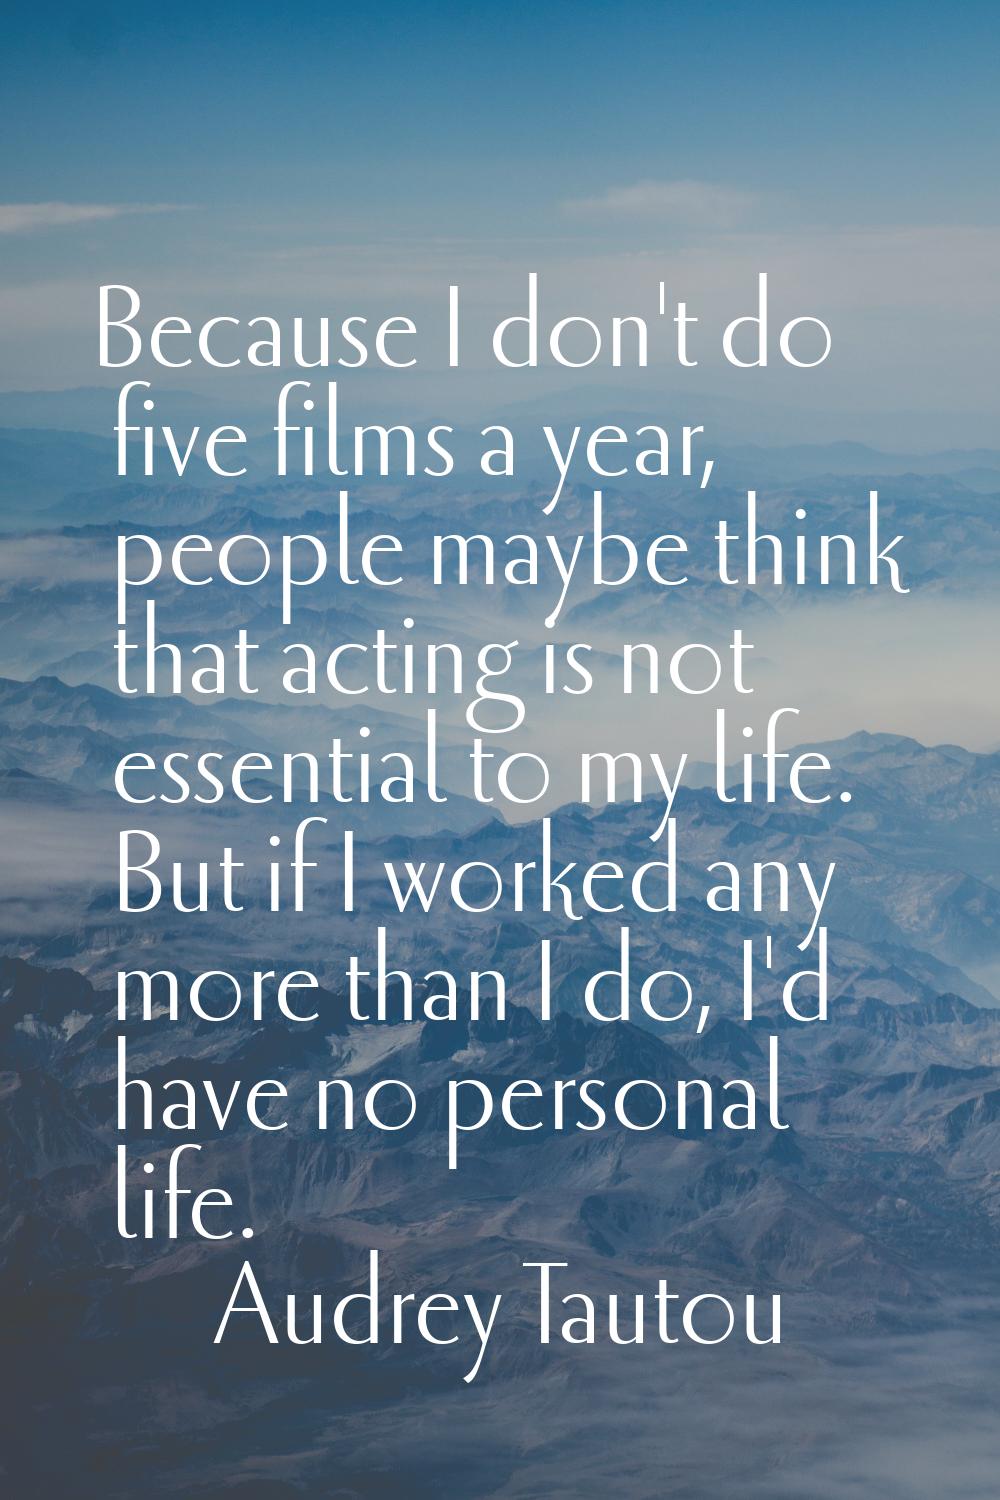 Because I don't do five films a year, people maybe think that acting is not essential to my life. B